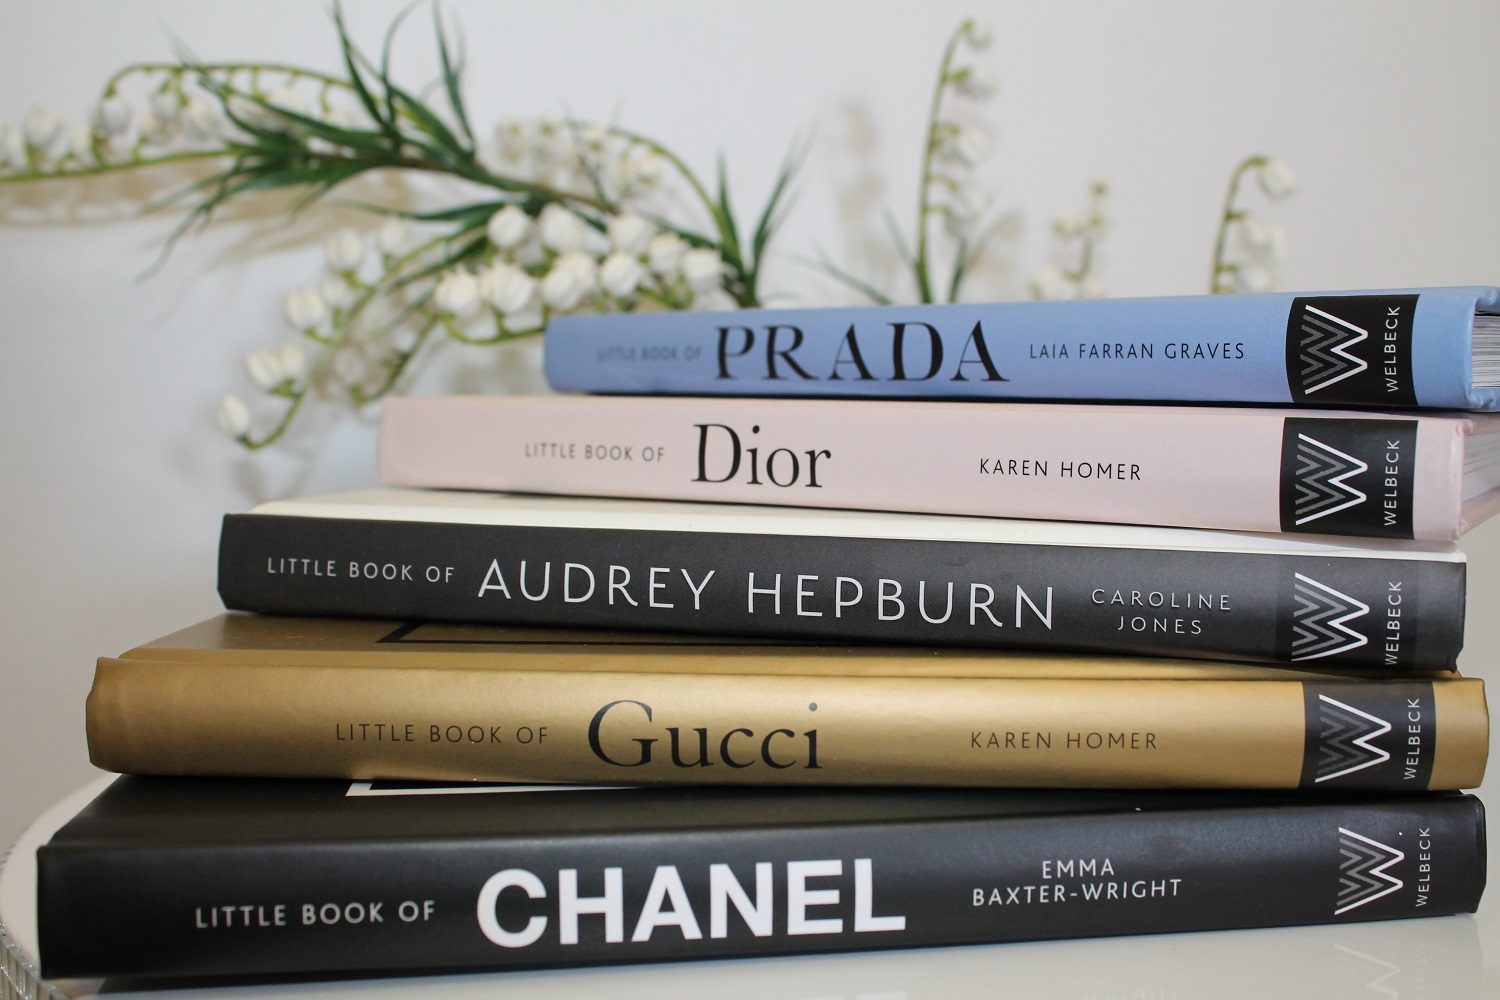  on Twitter Chanel art books are often used as coffee table decor  for those conscious about fashion and style at 110 each im really hoping  the Chanel book with Jennie can